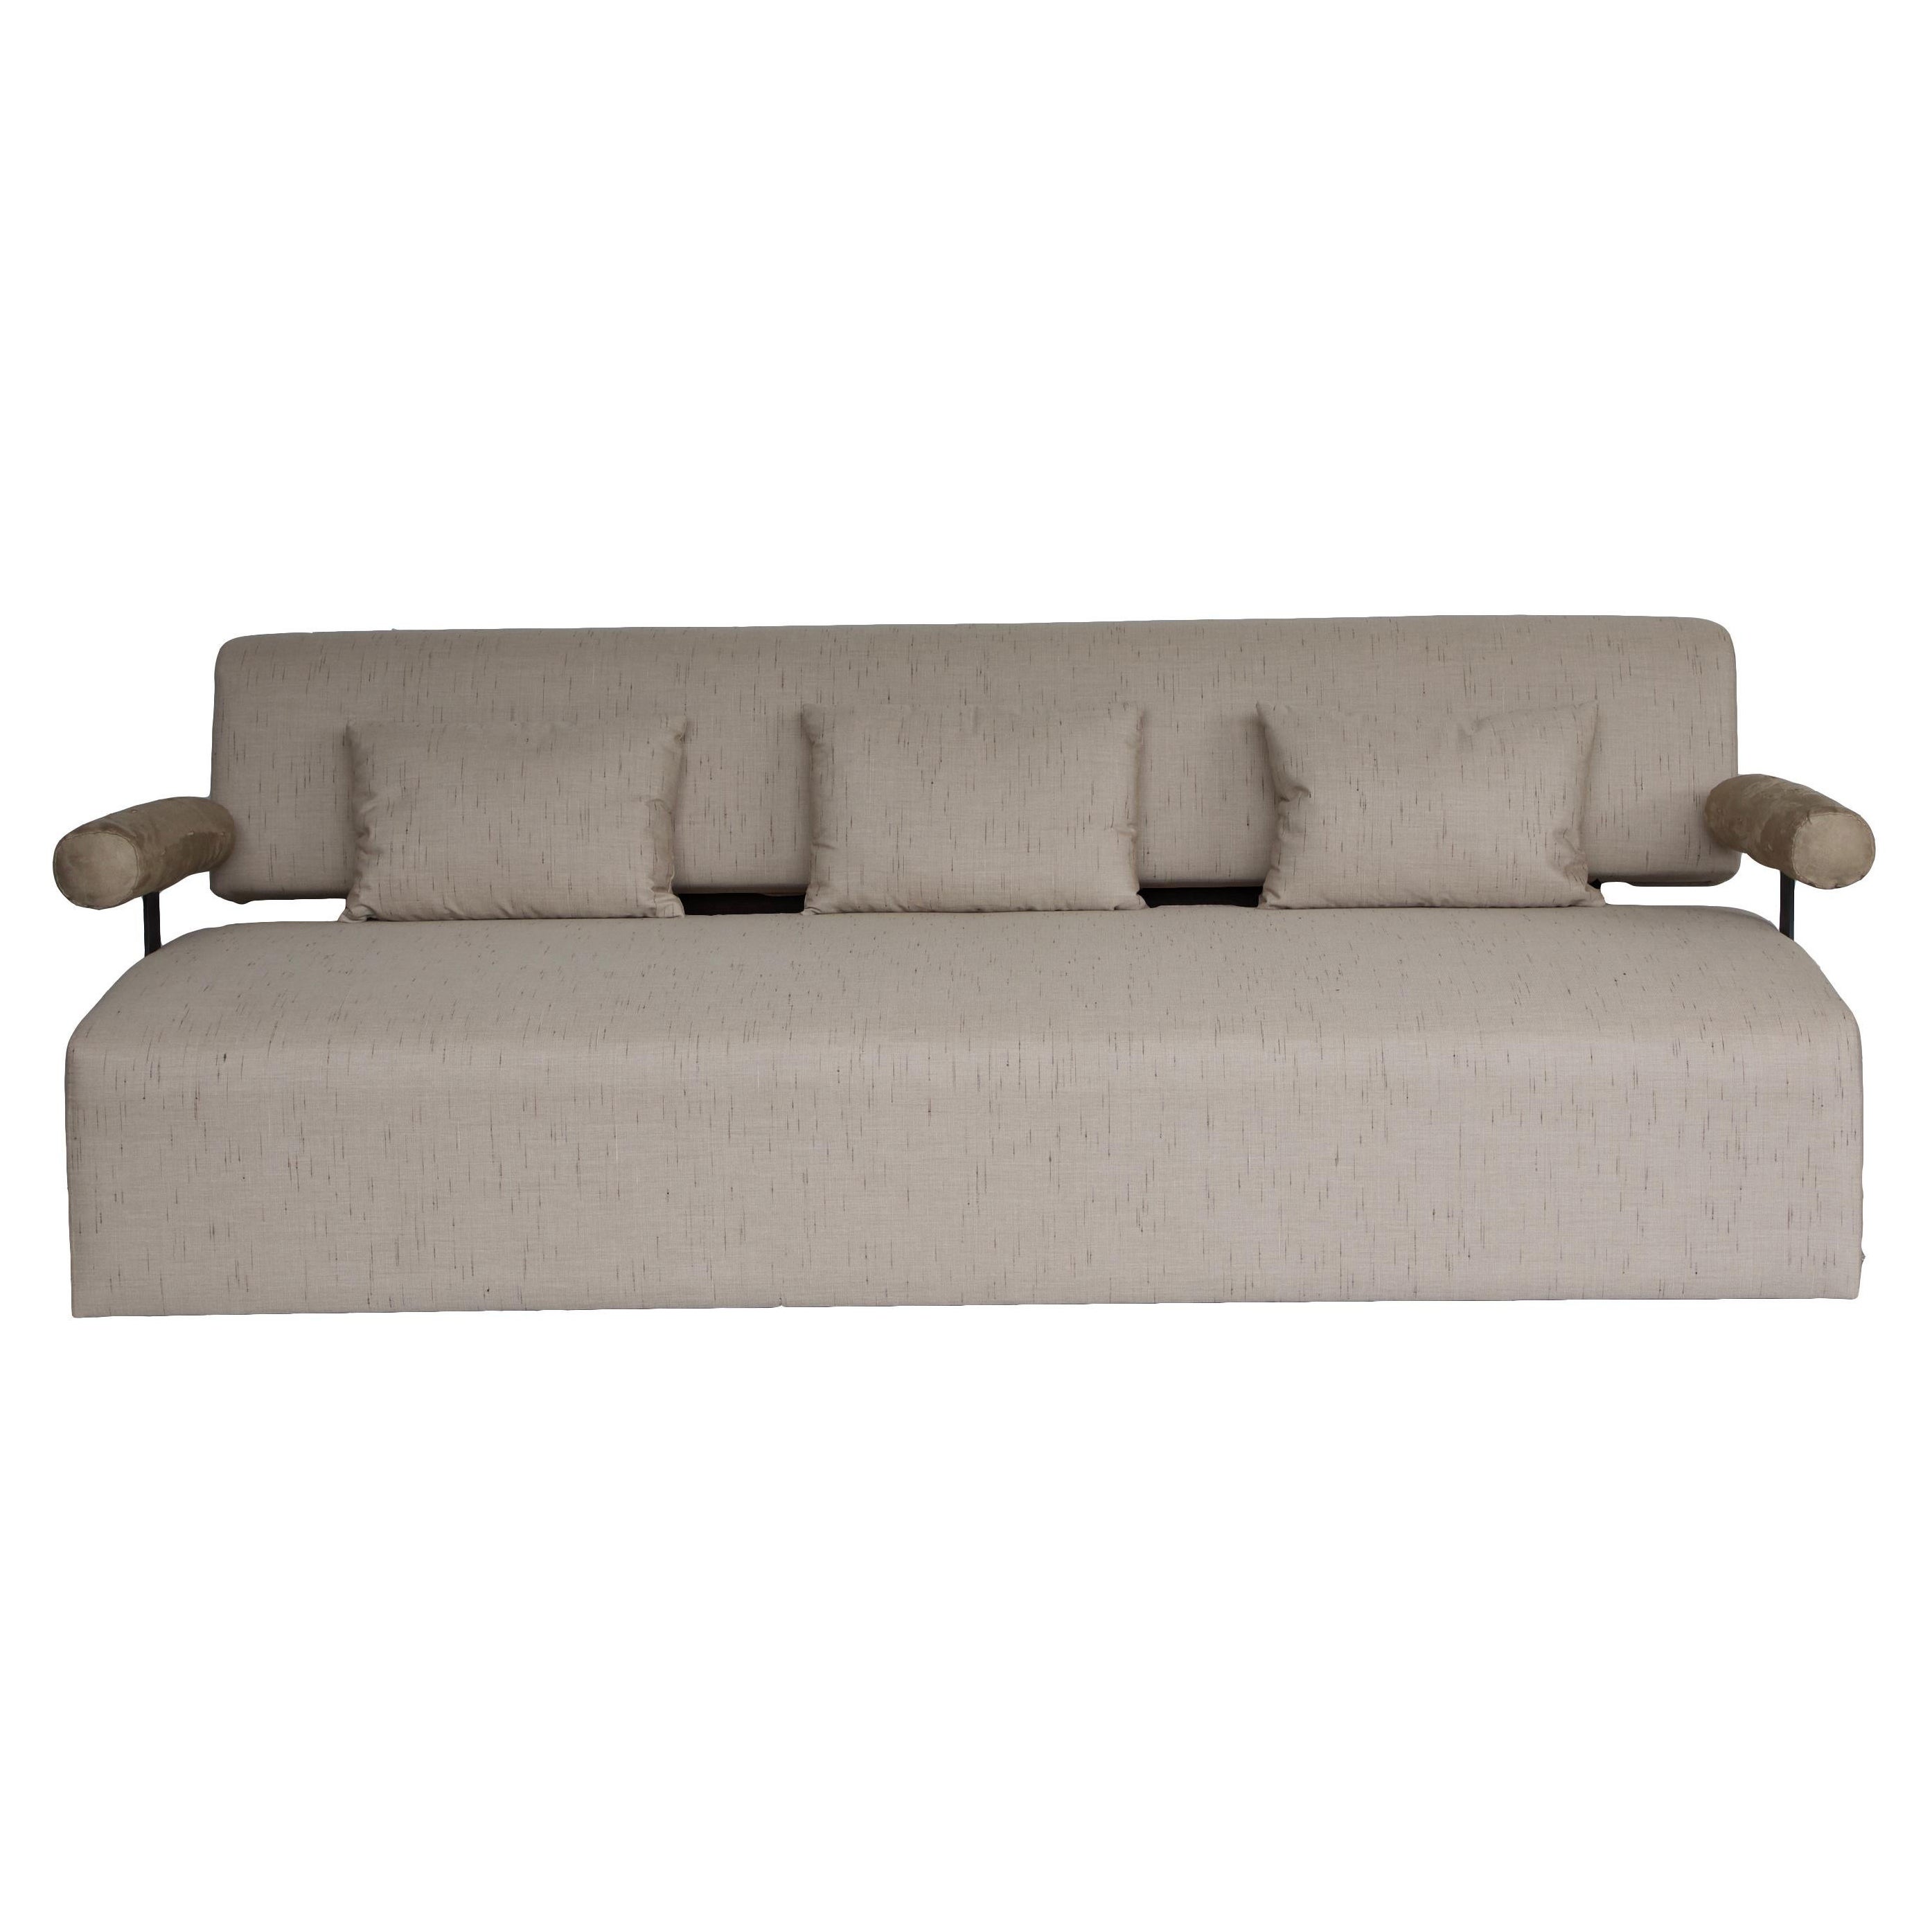 Raw Steel and Upholstered Oak, Contemporary, Sculptural, Pisa Sofa